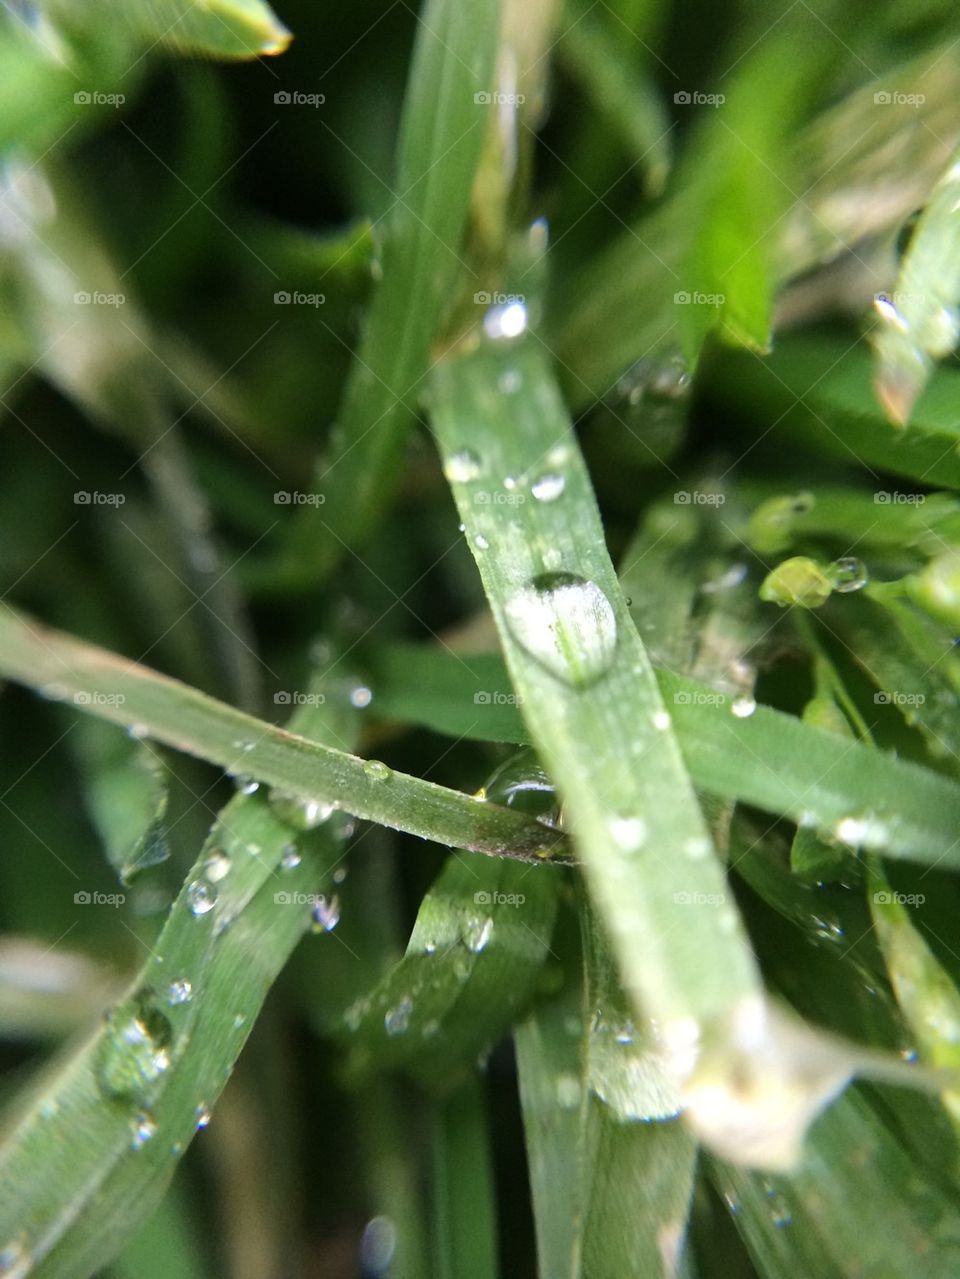 Water on the grass